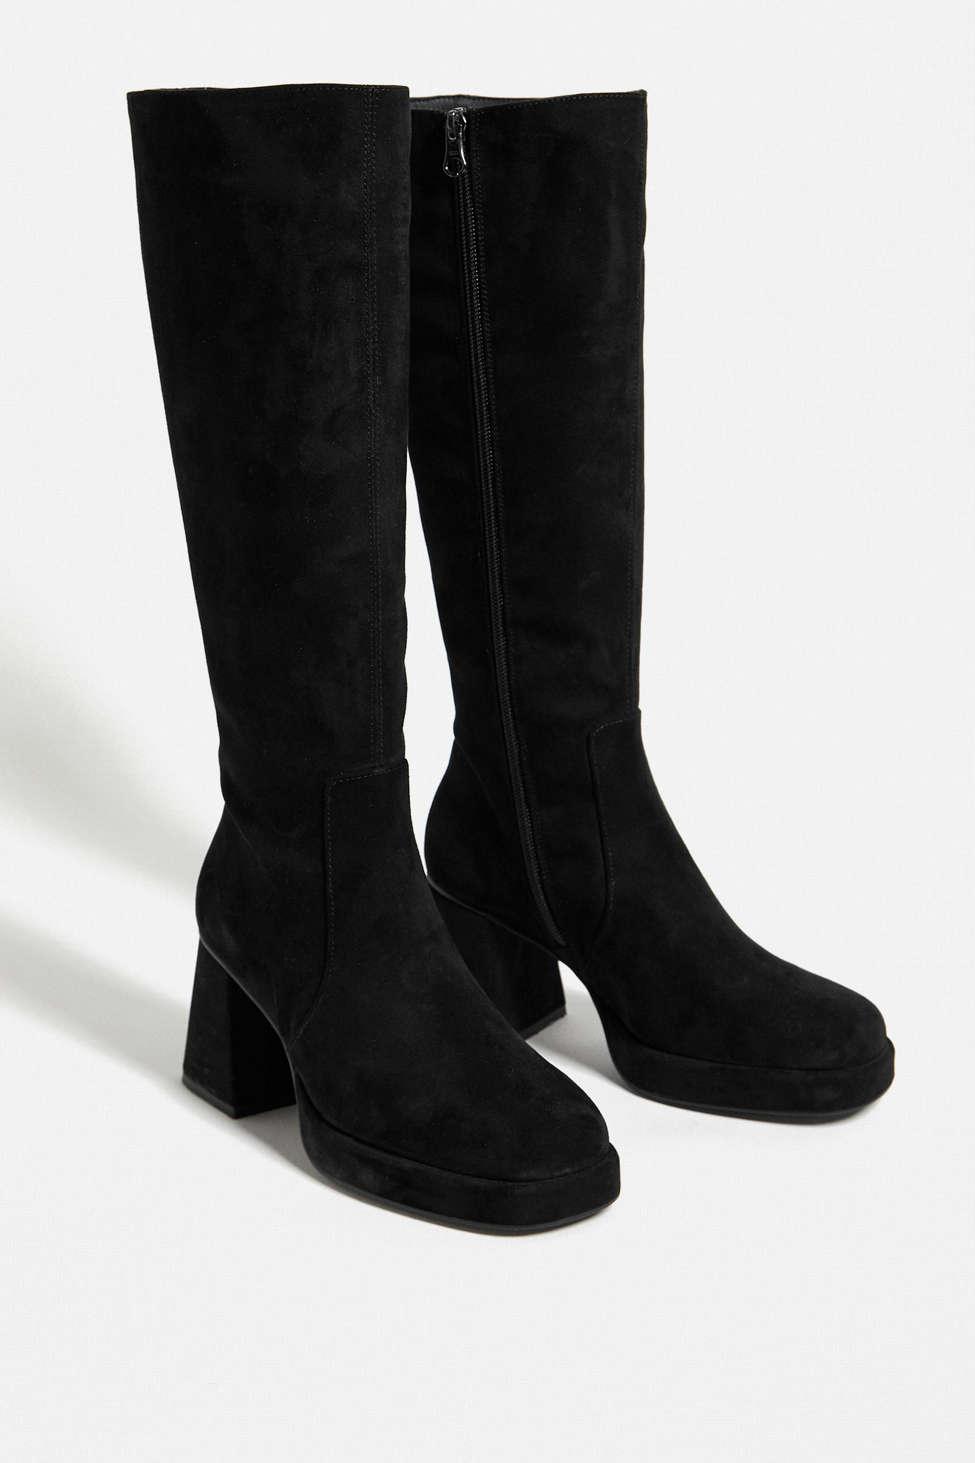 Urban Outfitters Uo Vix Knee-high Black Faux Suede Boots | Lyst